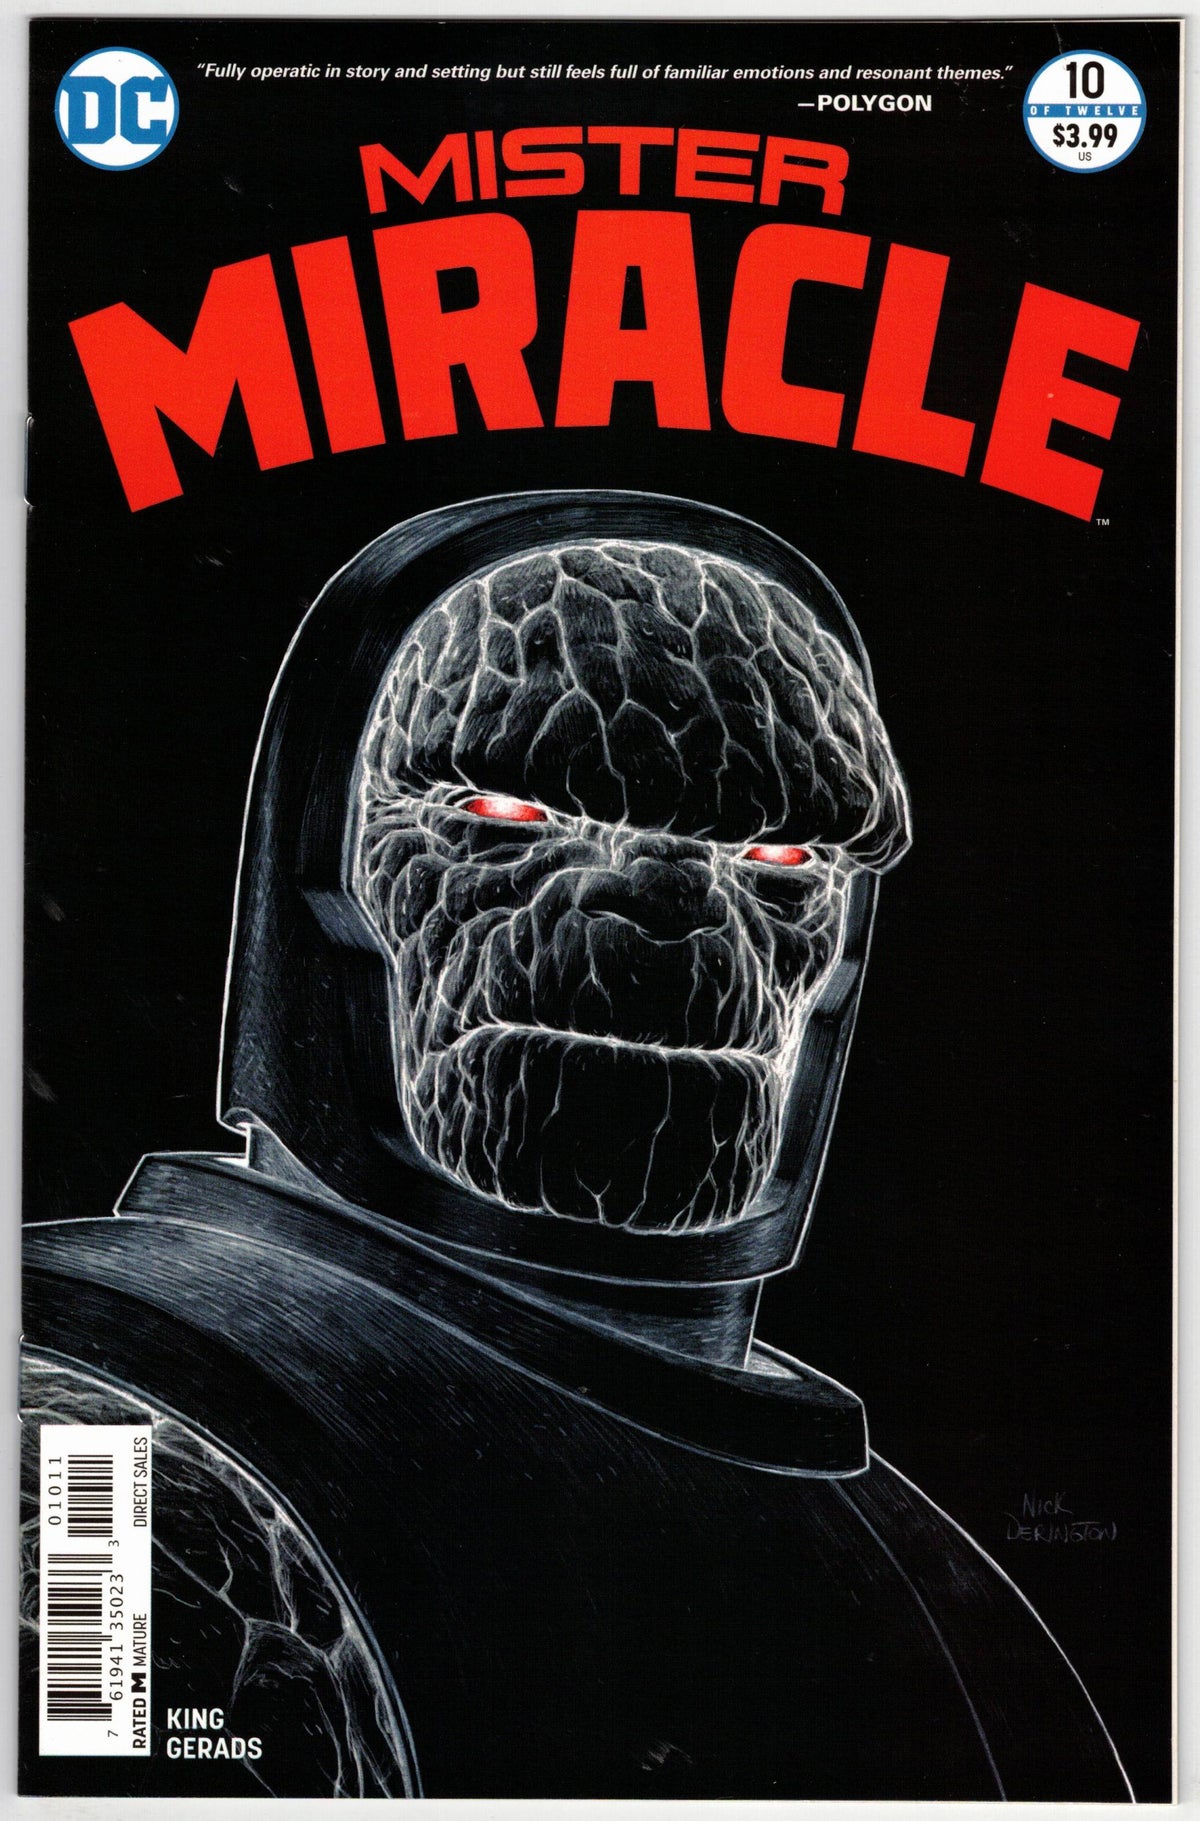 Photo of Mister Miracle, Vol. 4 (2018) Issue 10A - Near Mint Comic sold by Stronghold Collectibles